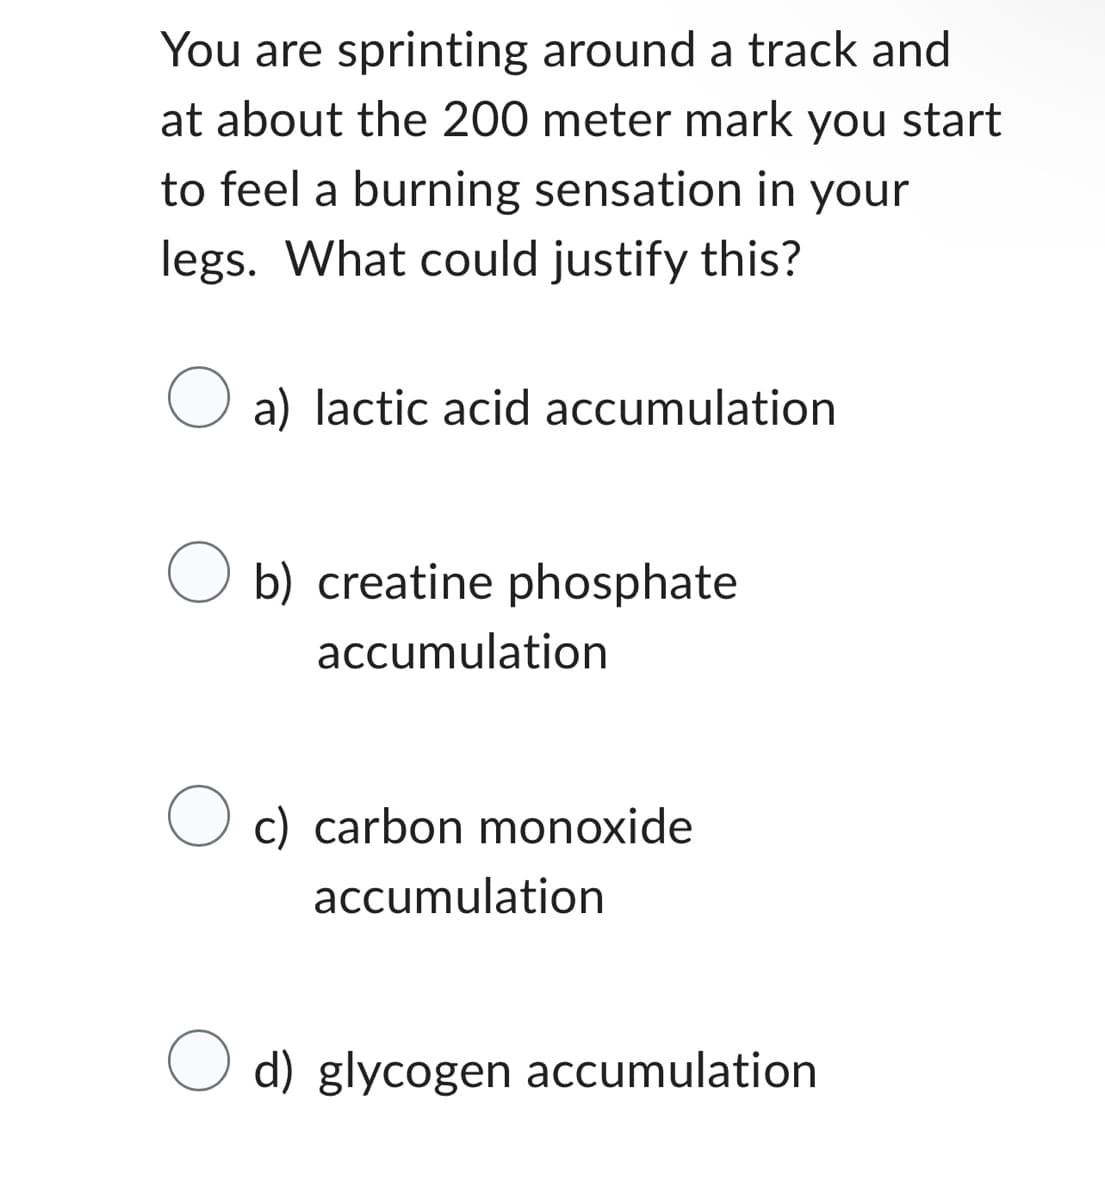 You are sprinting around a track and
at about the 200 meter mark you start
to feel a burning sensation in your
legs. What could justify this?
O
a) lactic acid accumulation
b) creatine phosphate
accumulation
O c) carbon monoxide
accumulation
O d) glycogen accumulation